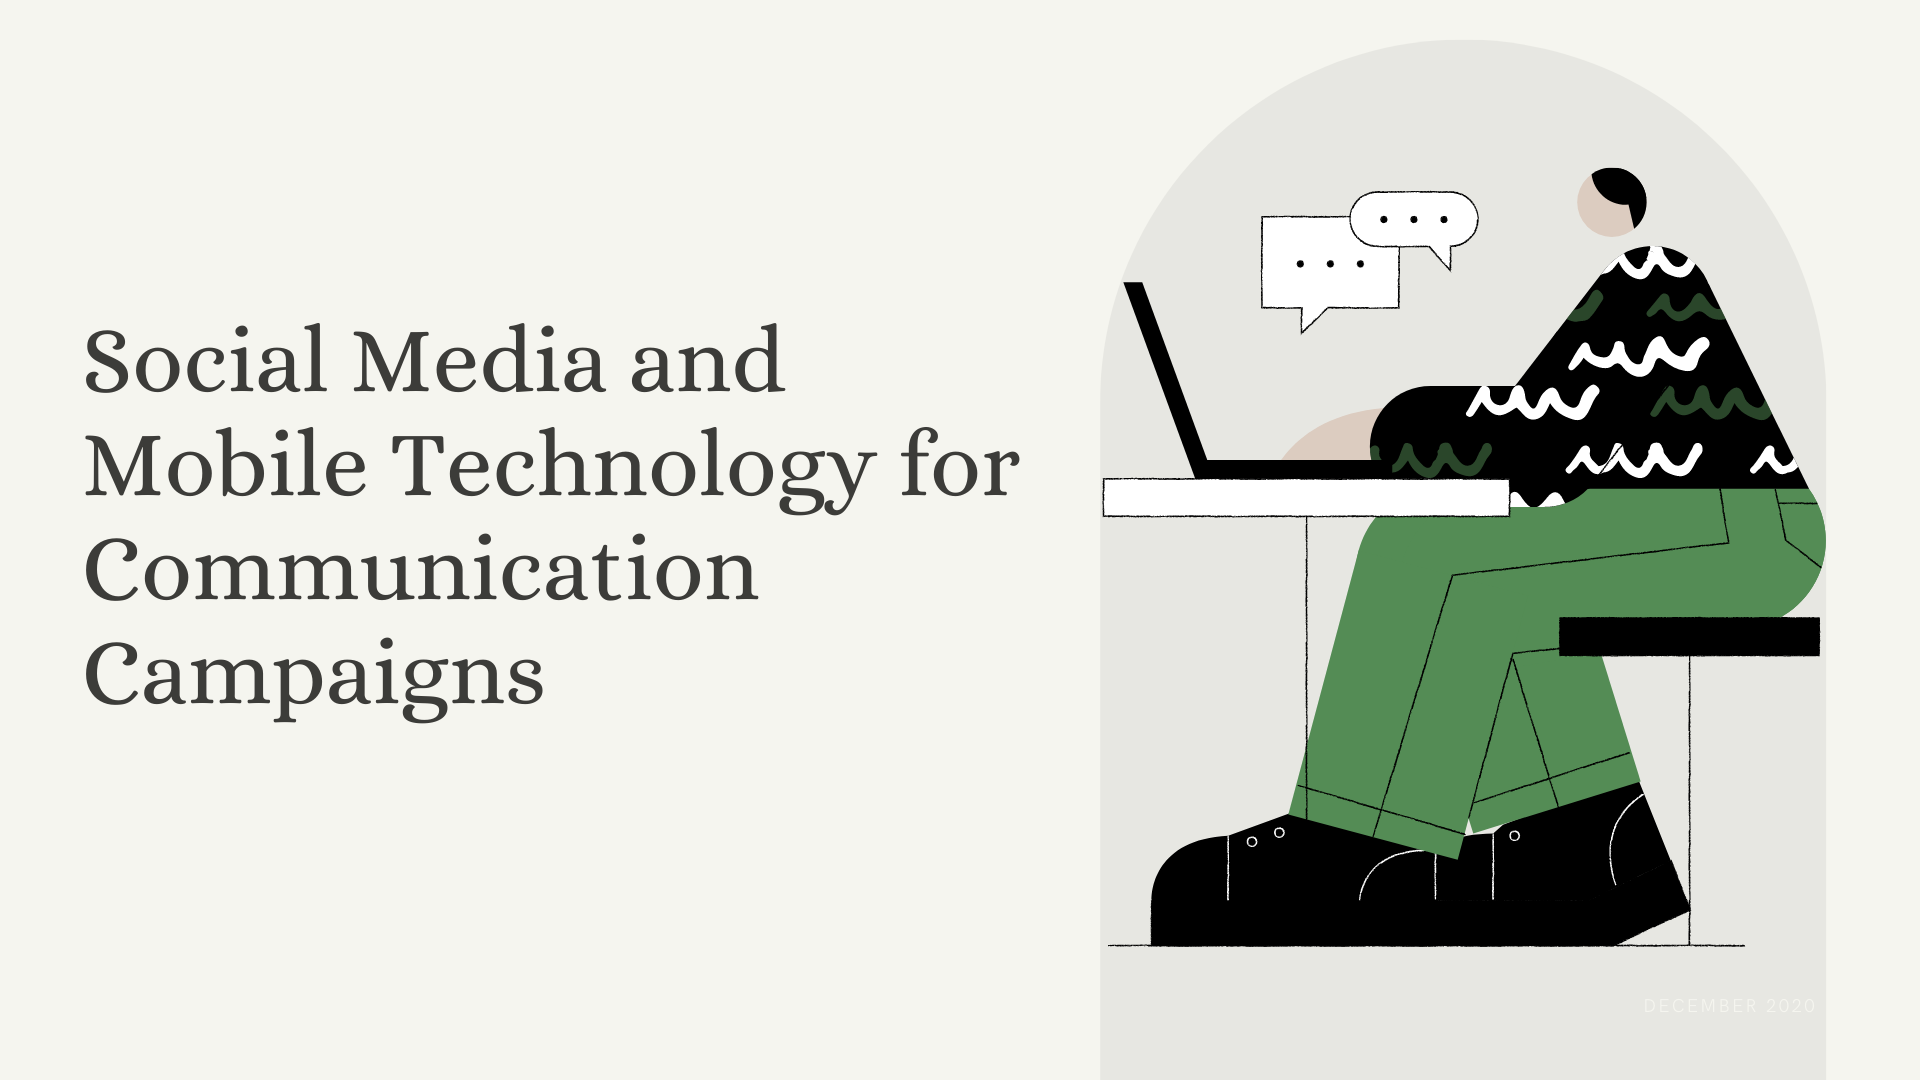 Social Media and Mobile Technology for Communication Campaigns